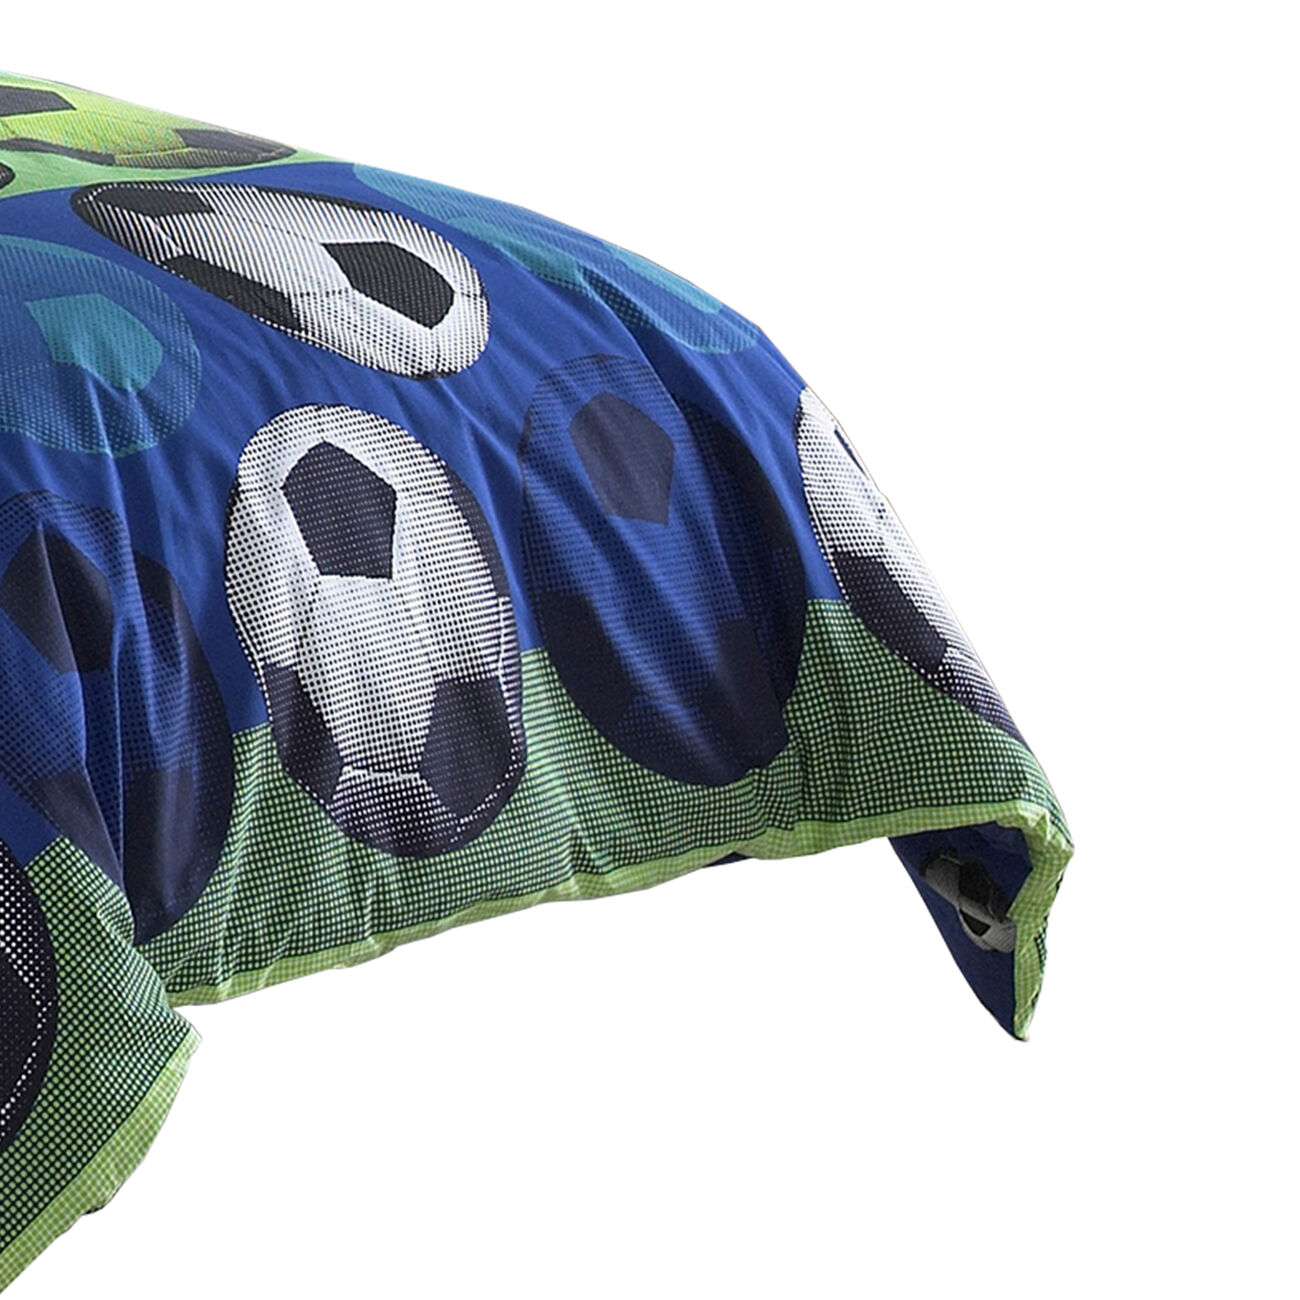 3 Piece Twin Size Comforter Set with Soccer Theme, Multicolor